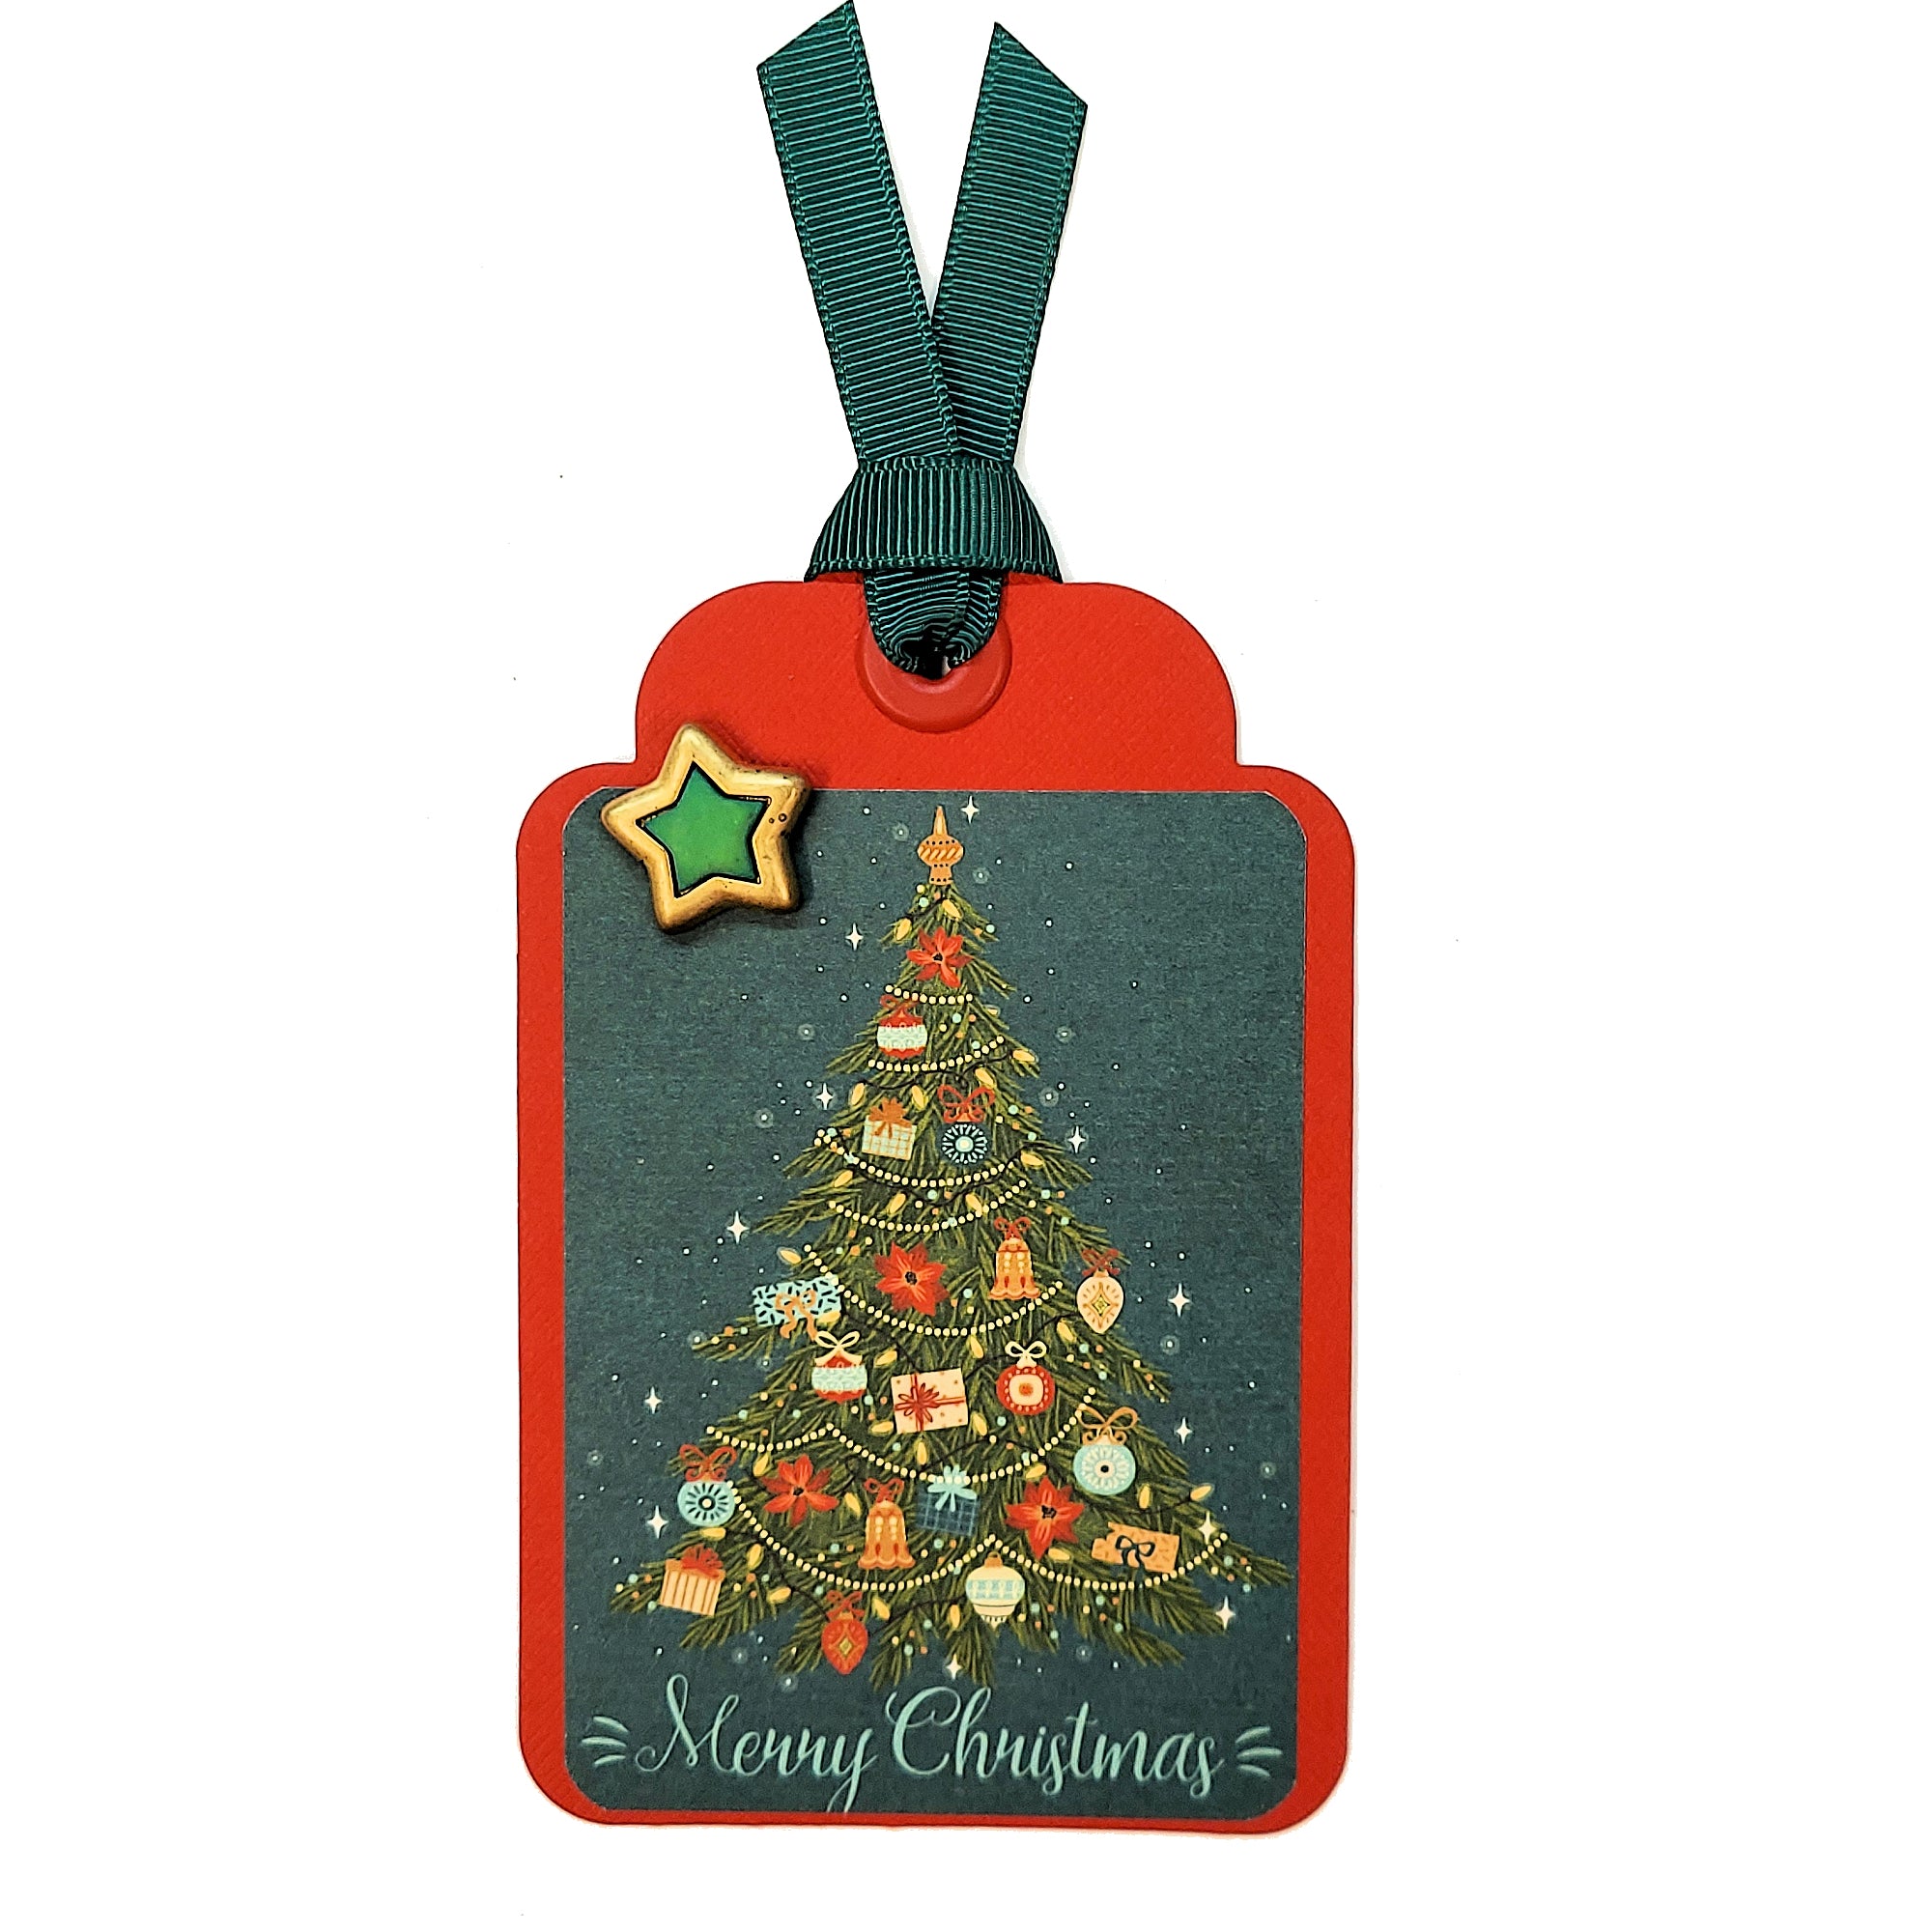 Merry Christmas Tag 3 x 5 Coordinating Scrapbook Tag Embellishment by SSC Designs